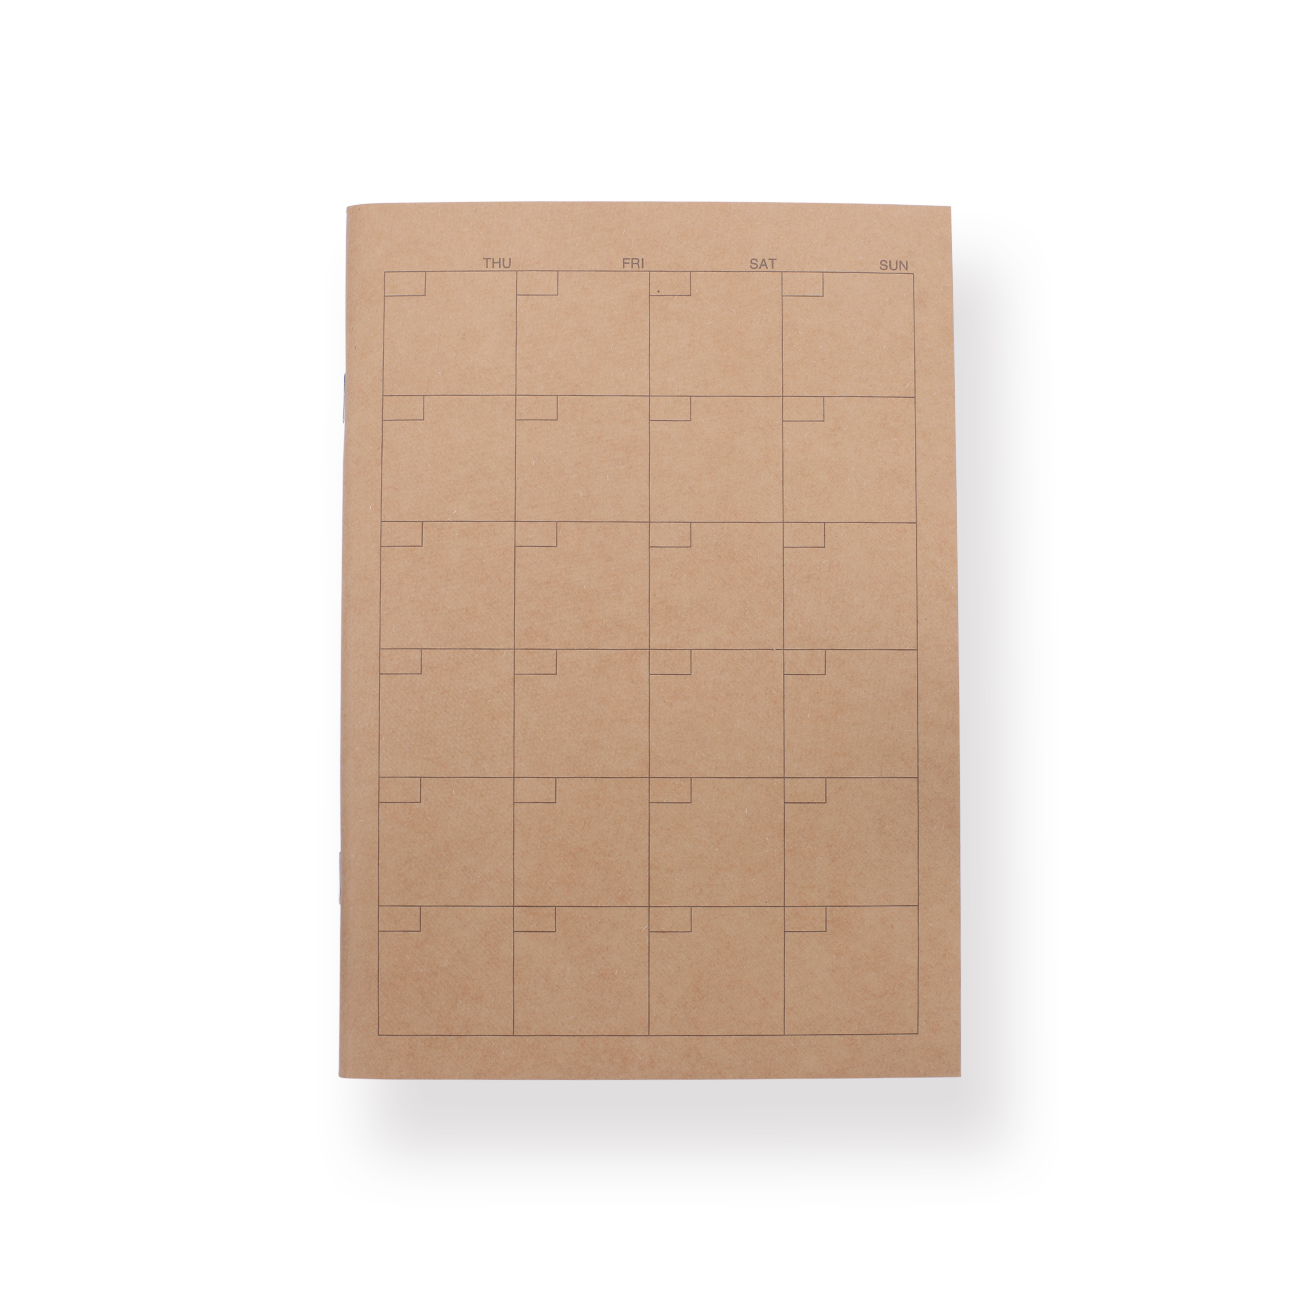 Monthly Planner Notebook